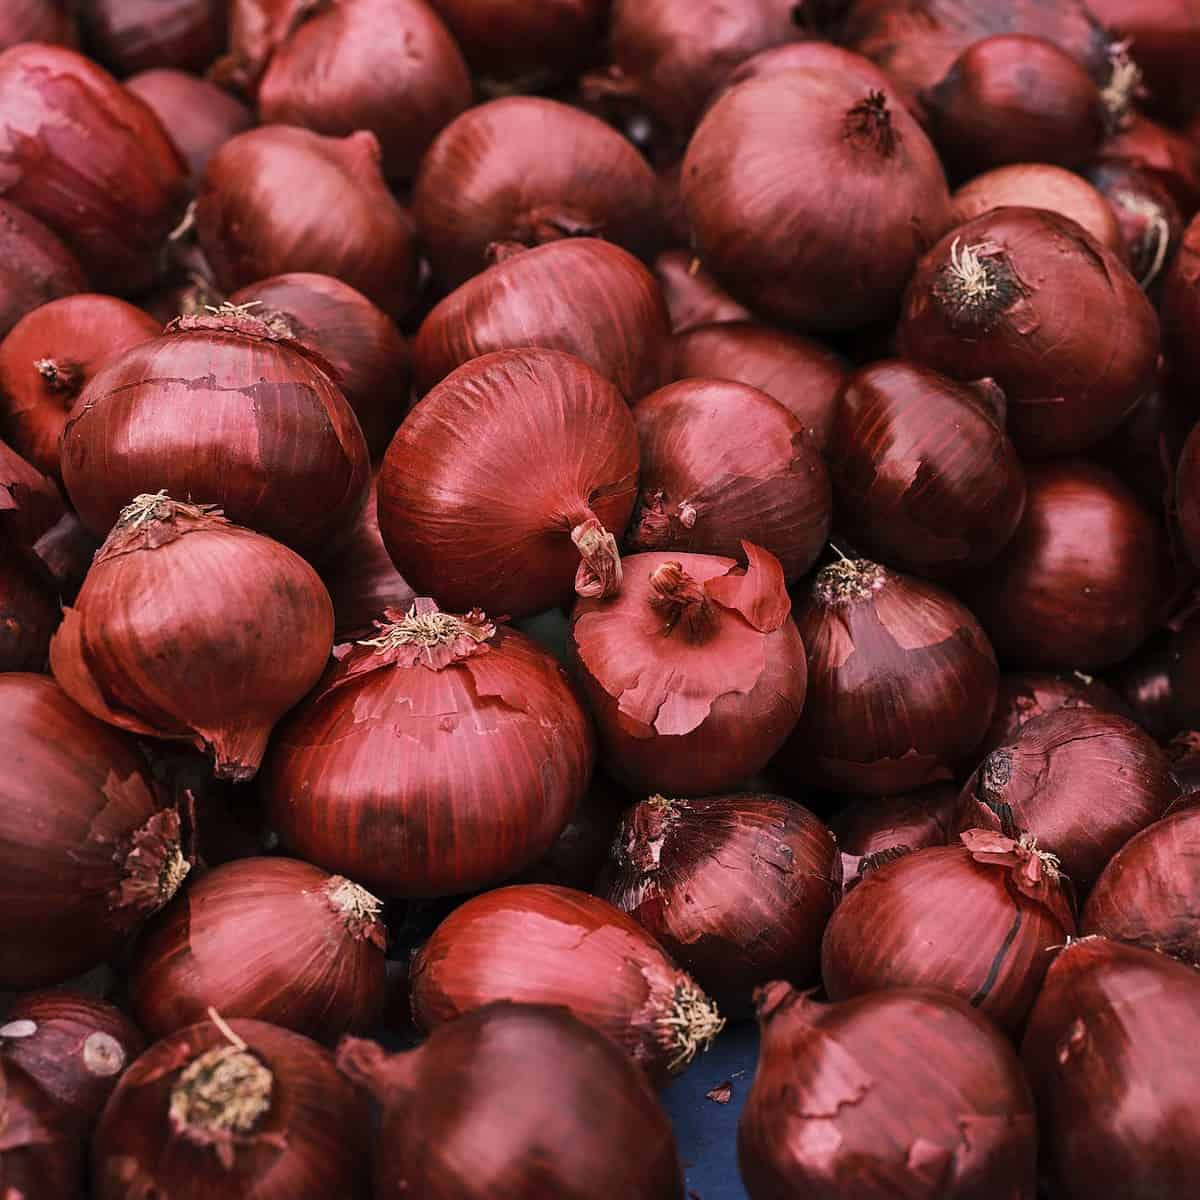 red onions in close up shot